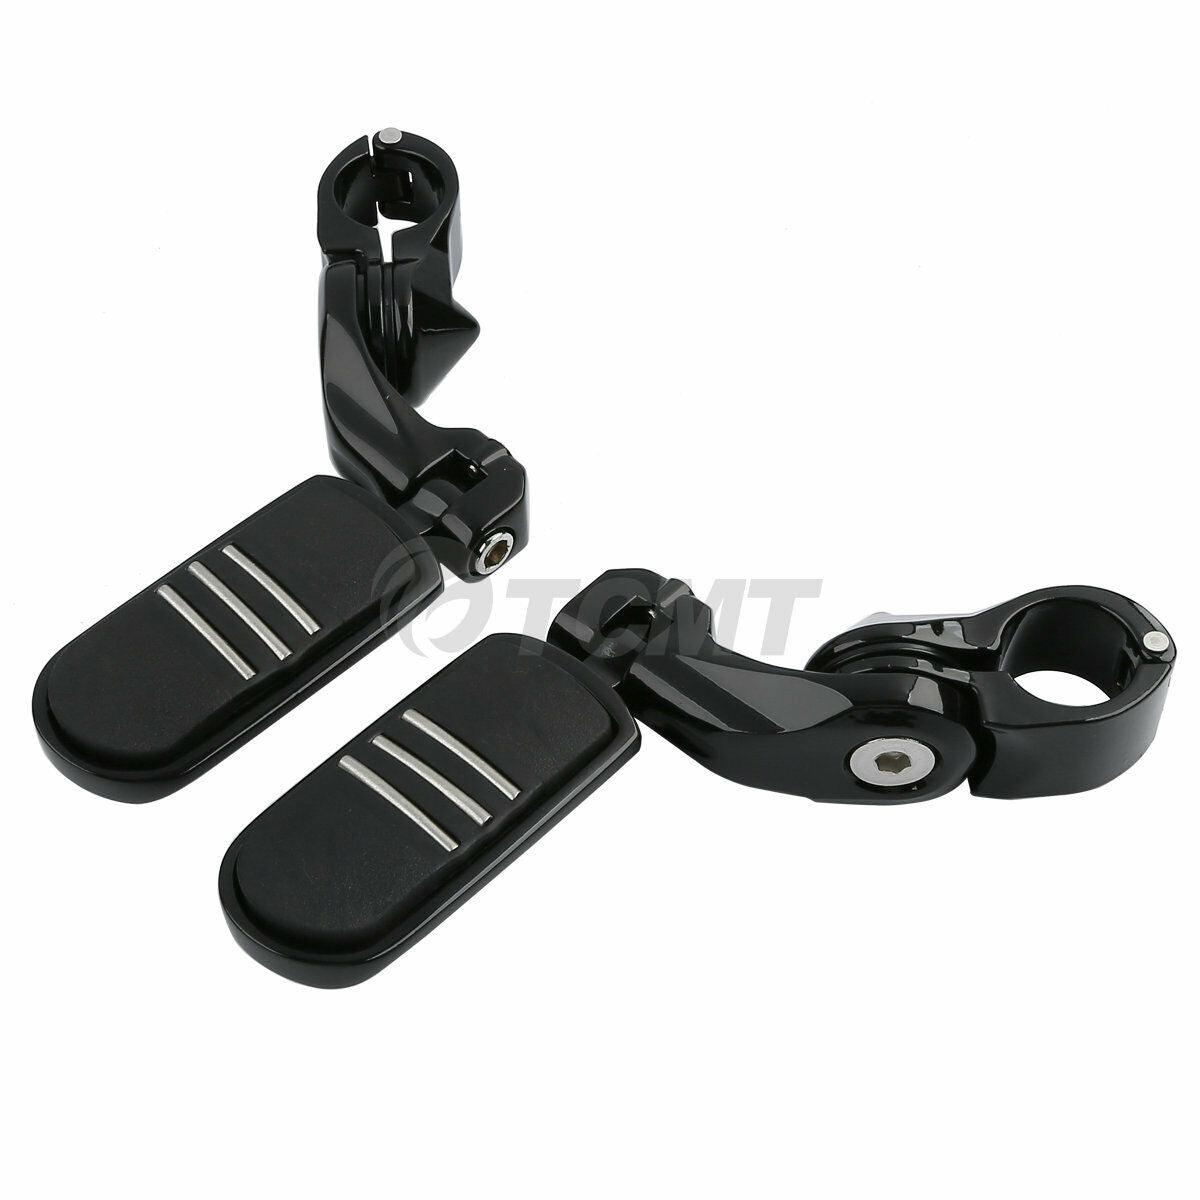 32mm 1.25" Short Angled Highway Engine Guard Foot Pegs Mount For Harley-Davidson - Moto Life Products